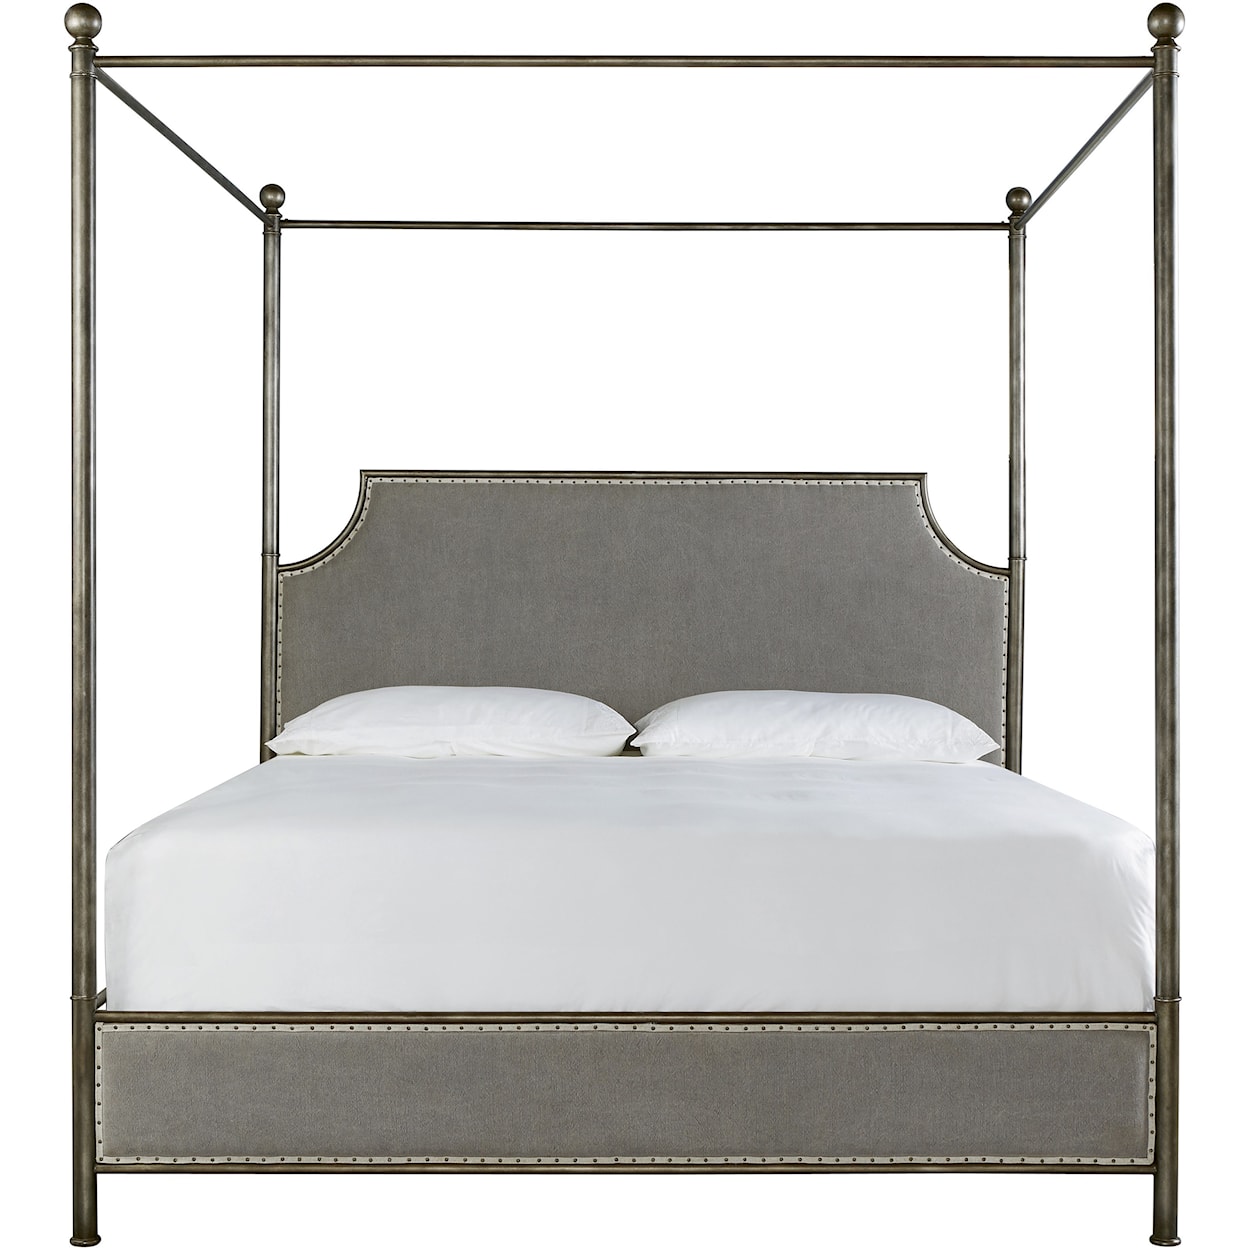 Universal Sojourn Respite King Bed